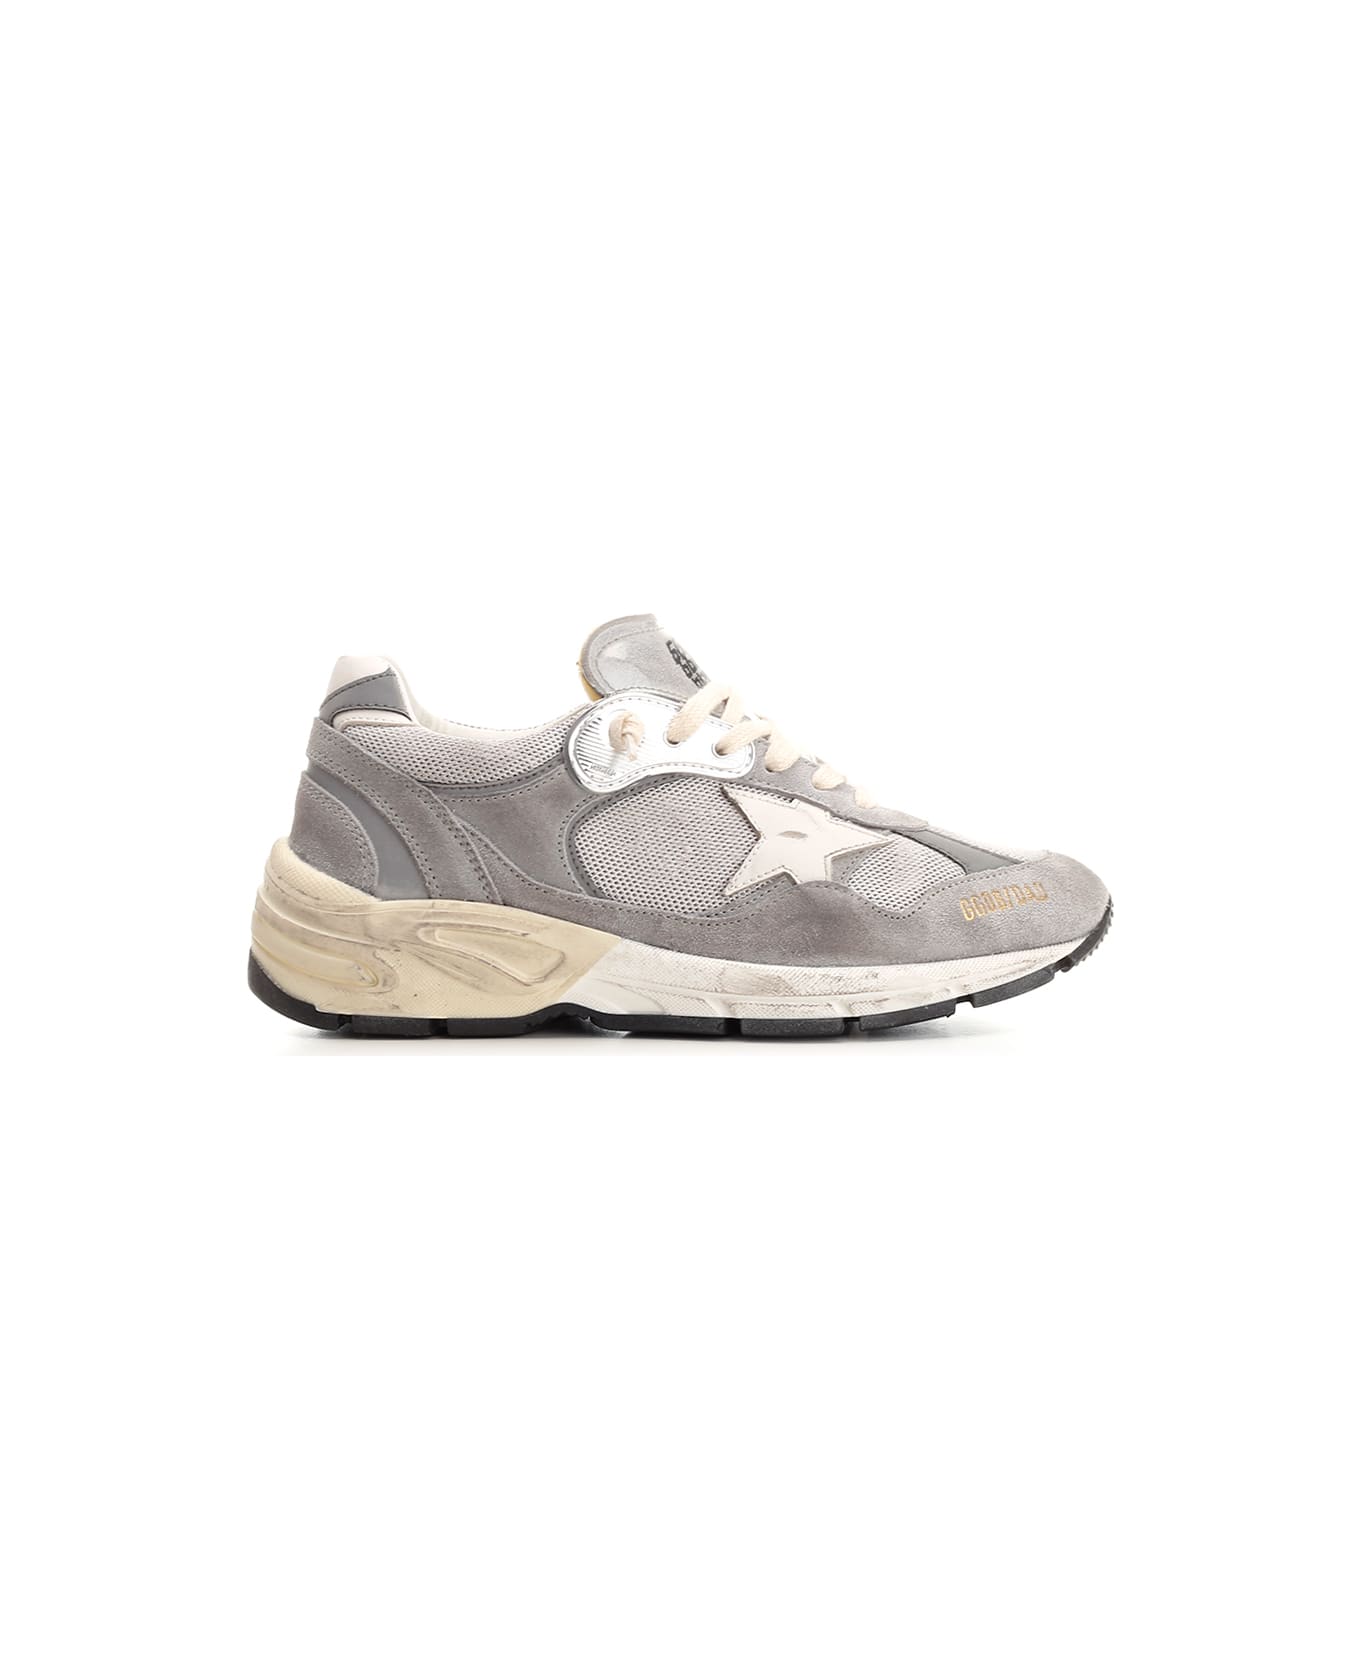 Golden Goose Running Dad Sneakers - Grey/Silver/White